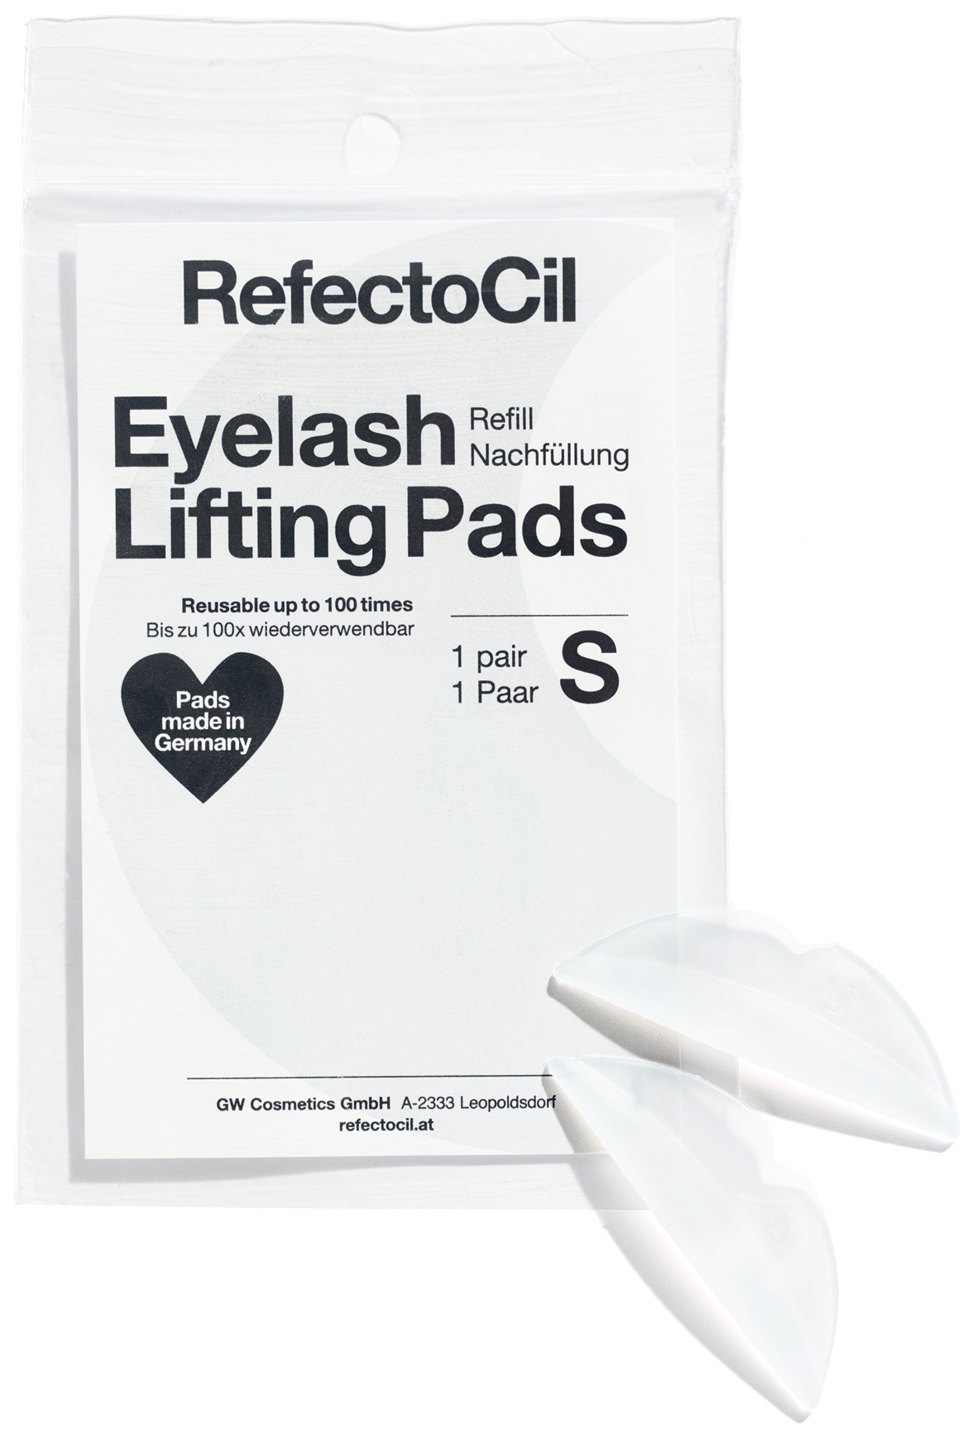 RefectoCil - Eyelash Lift Refill Pads in weiß